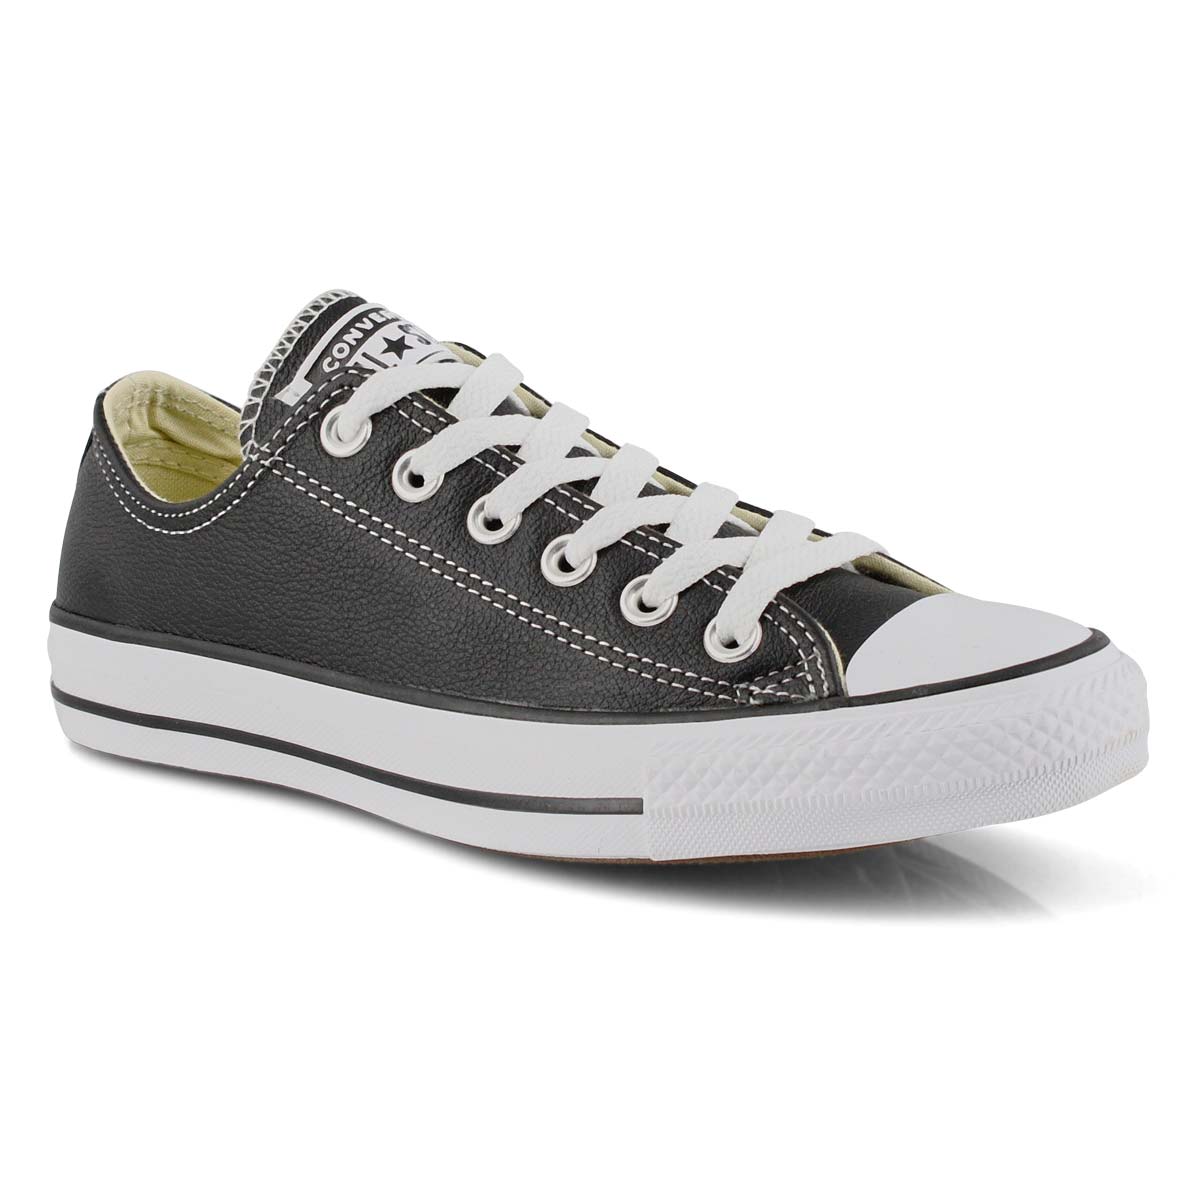 converse ct leather